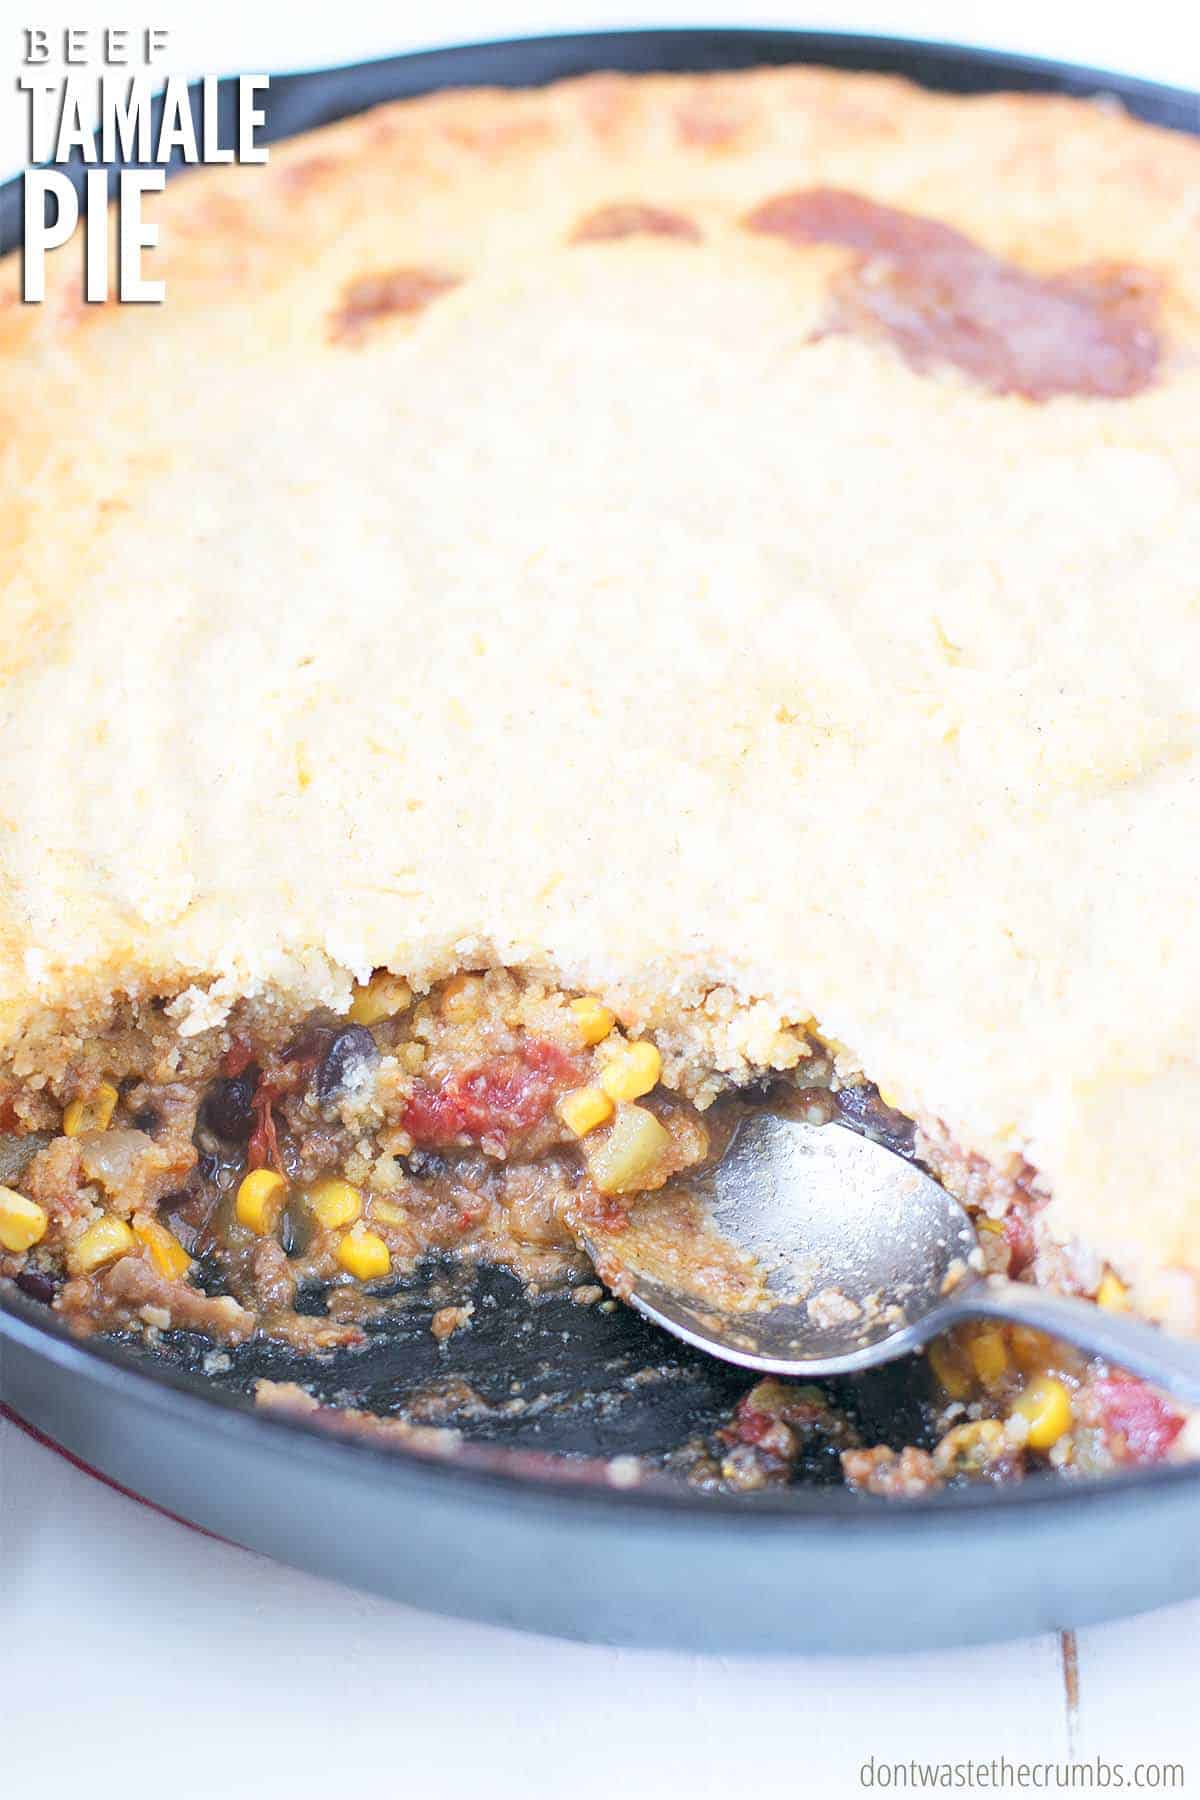 Mexican Tamale Pie is a one-pot meal made with either ground beef or chicken, pantry staple ingredients, and a tamale-inspired topping.